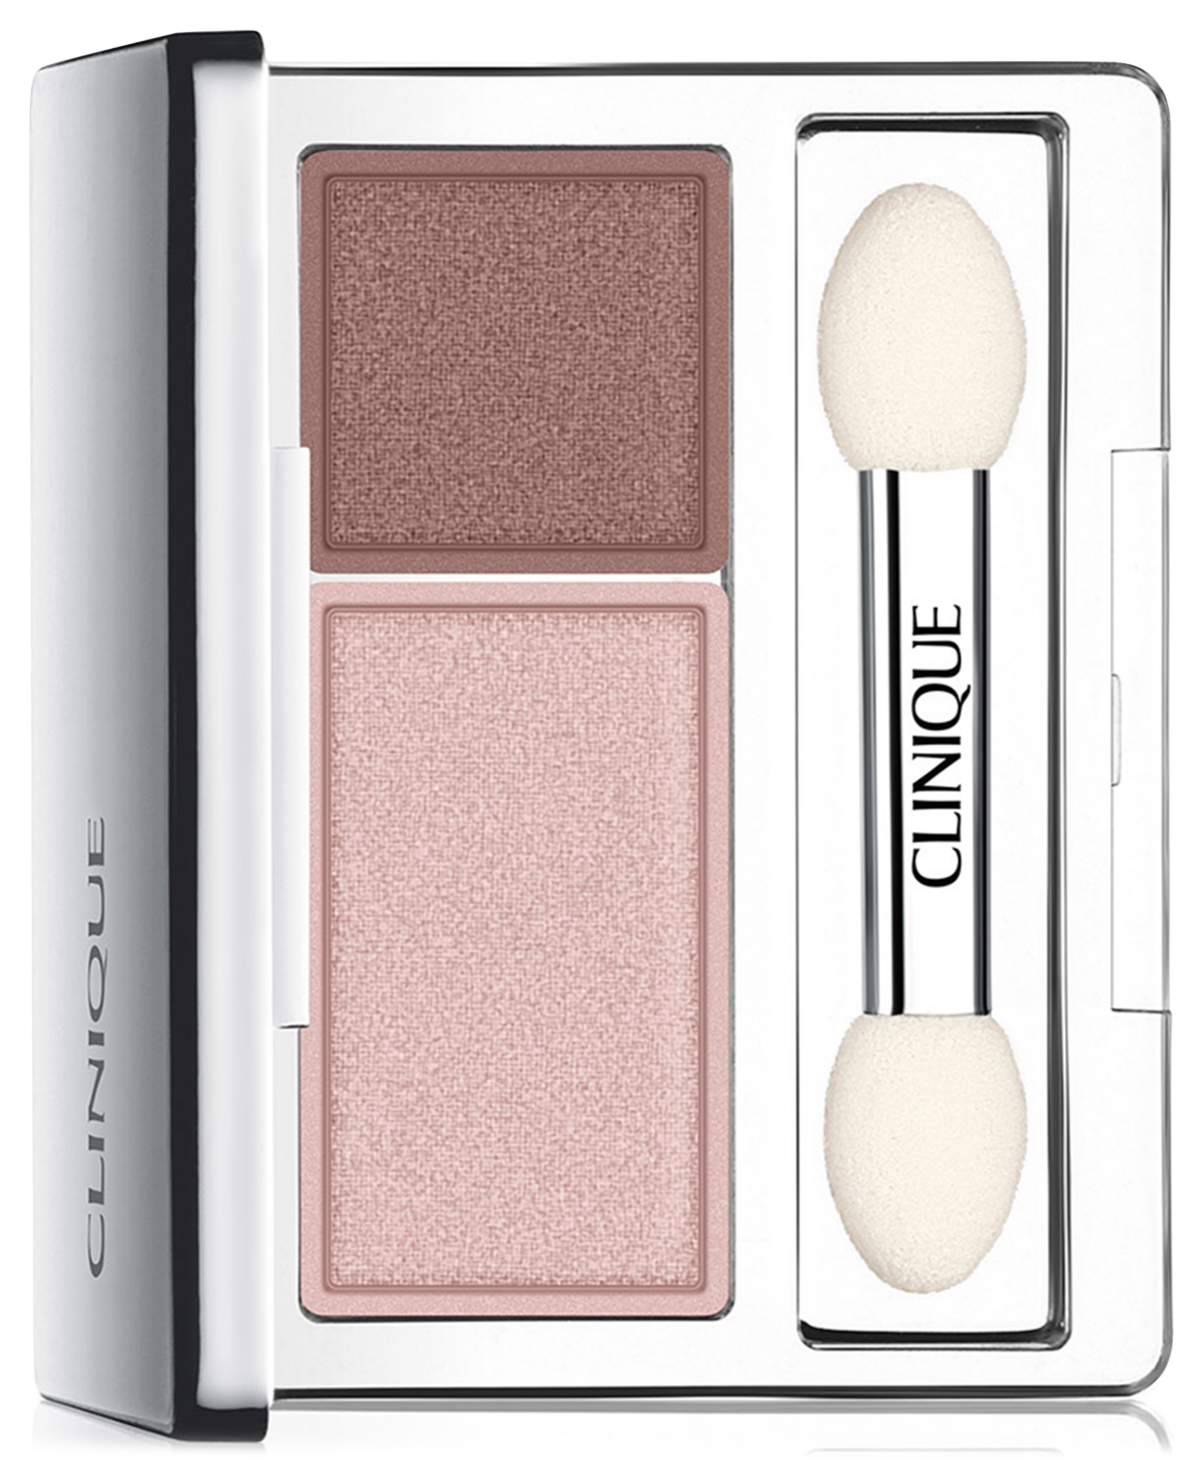 Clinique All About Shadow Duo Eyeshadow, 0.12 Oz. In Seashell Pink,fawn Satin